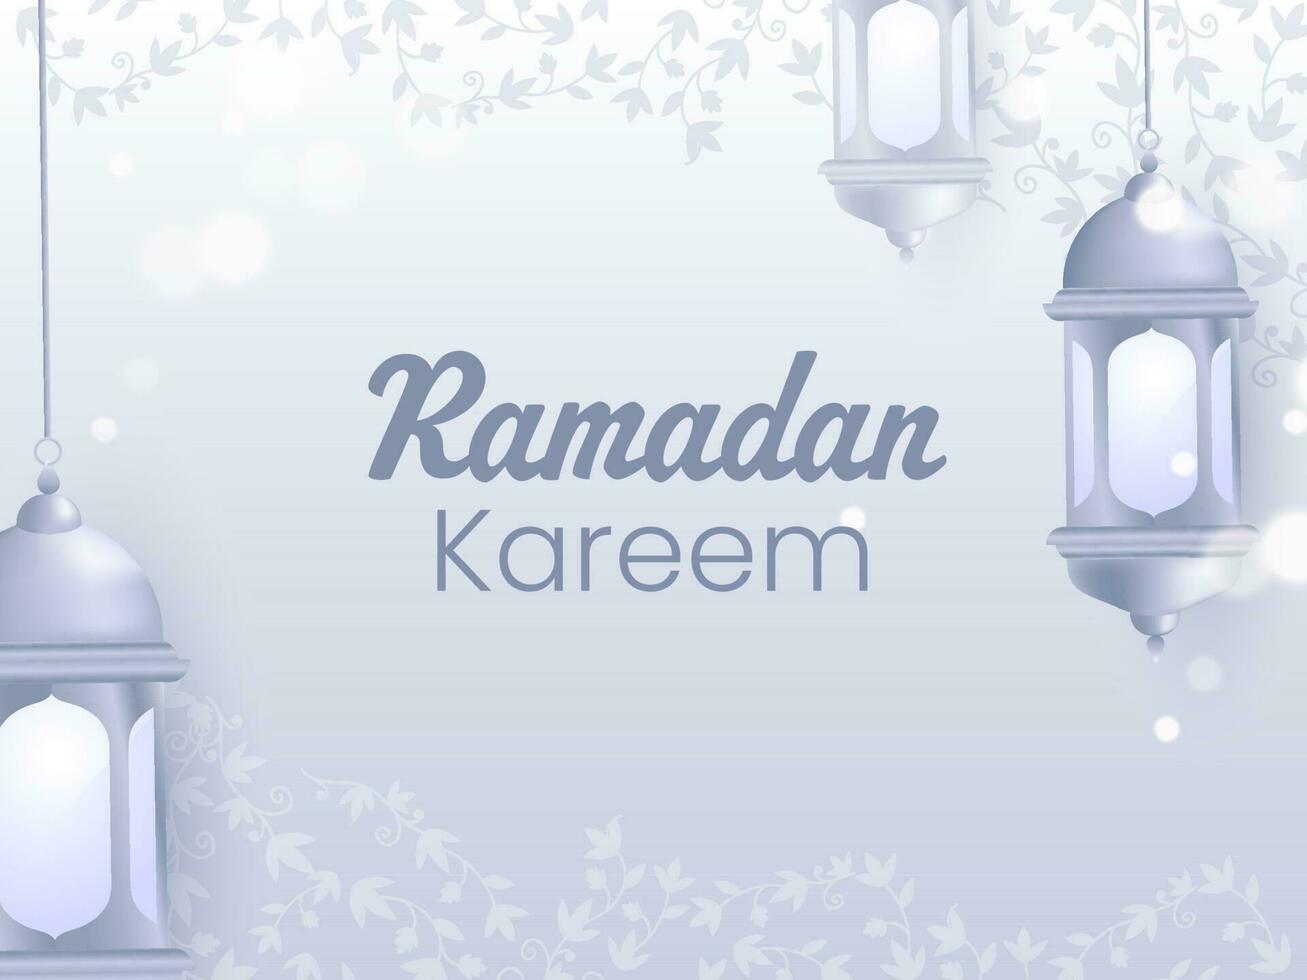 Ramadan Kareem Font With Hanging Lanterns And Leaves Decorated On Gray Background. vector